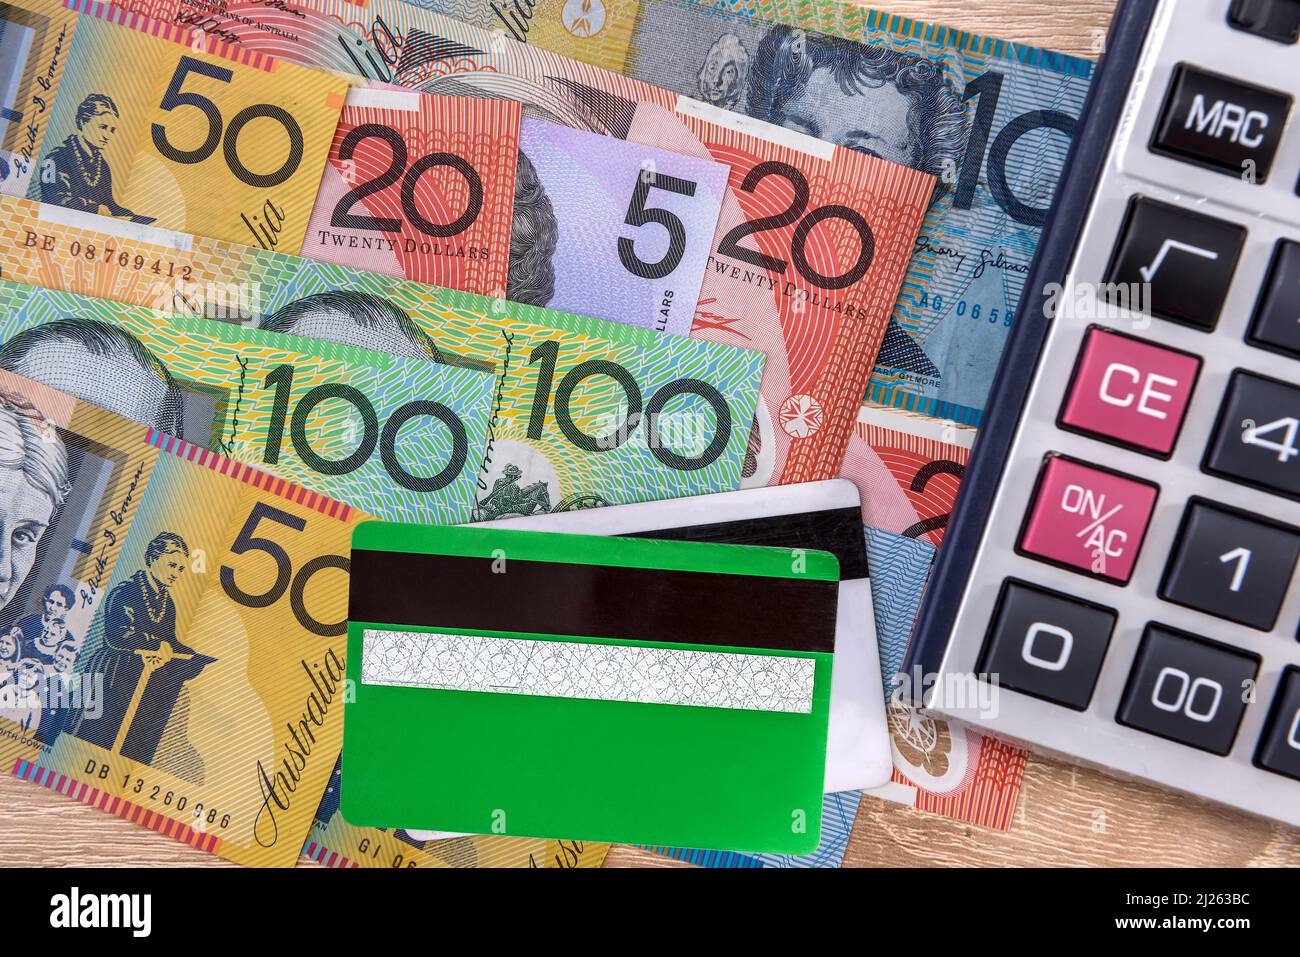 Cash and credit card. Colorful australian dollar banknotes with plastic banking card and calculator on table. Financial system Stock Photo